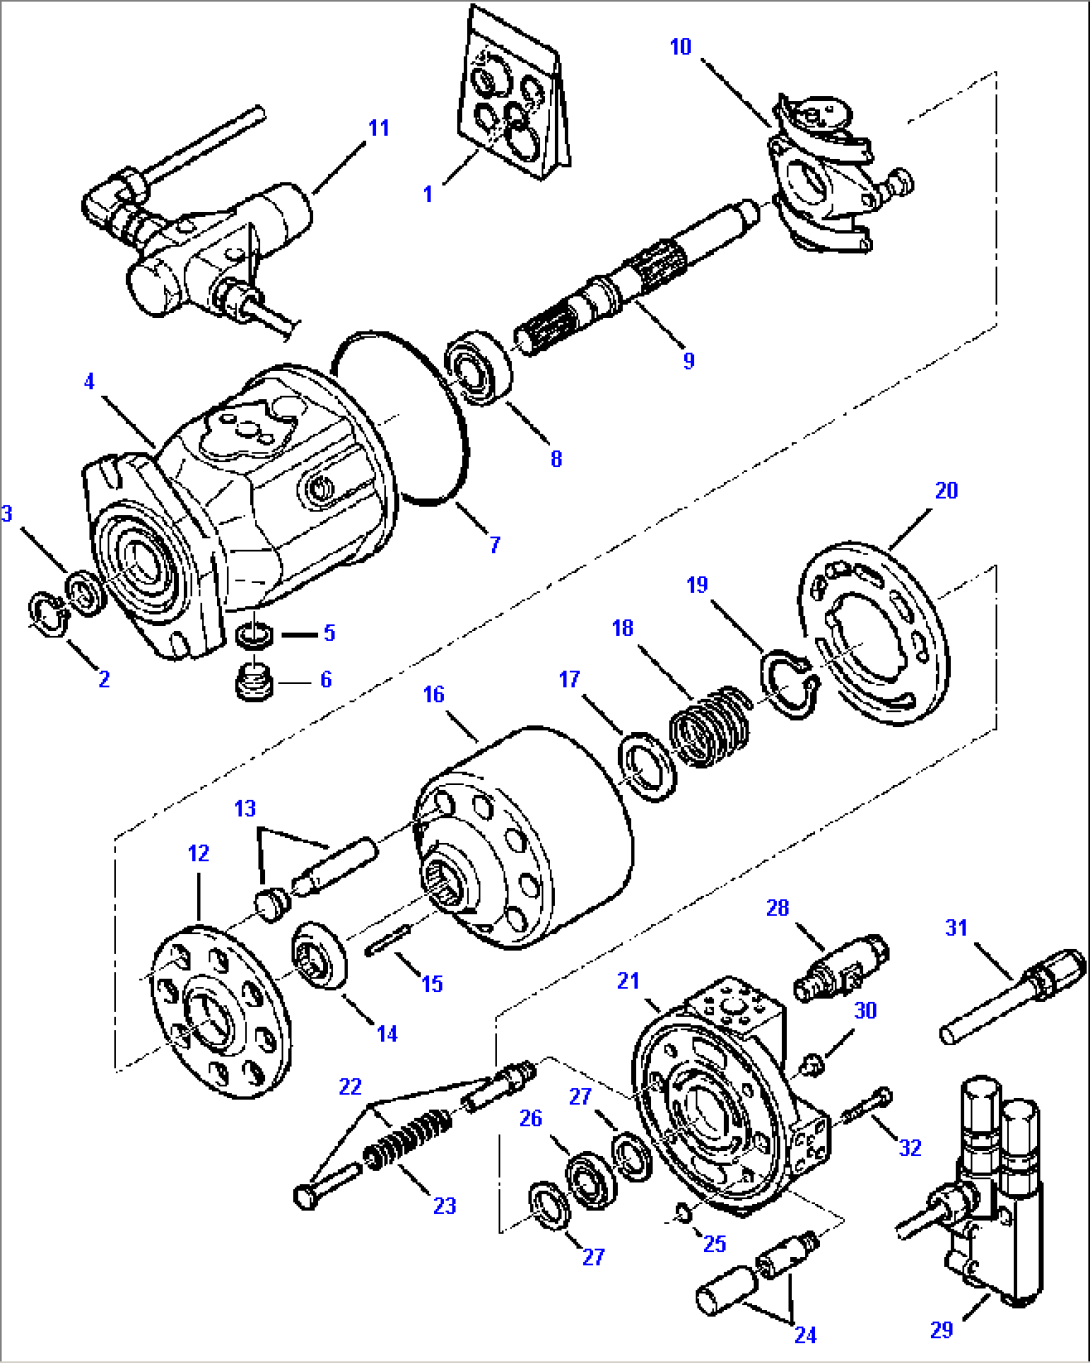 FIG. H6120-01A0 HYDRAULIC PUMP - HOUSING AND INTERNAL PARTS